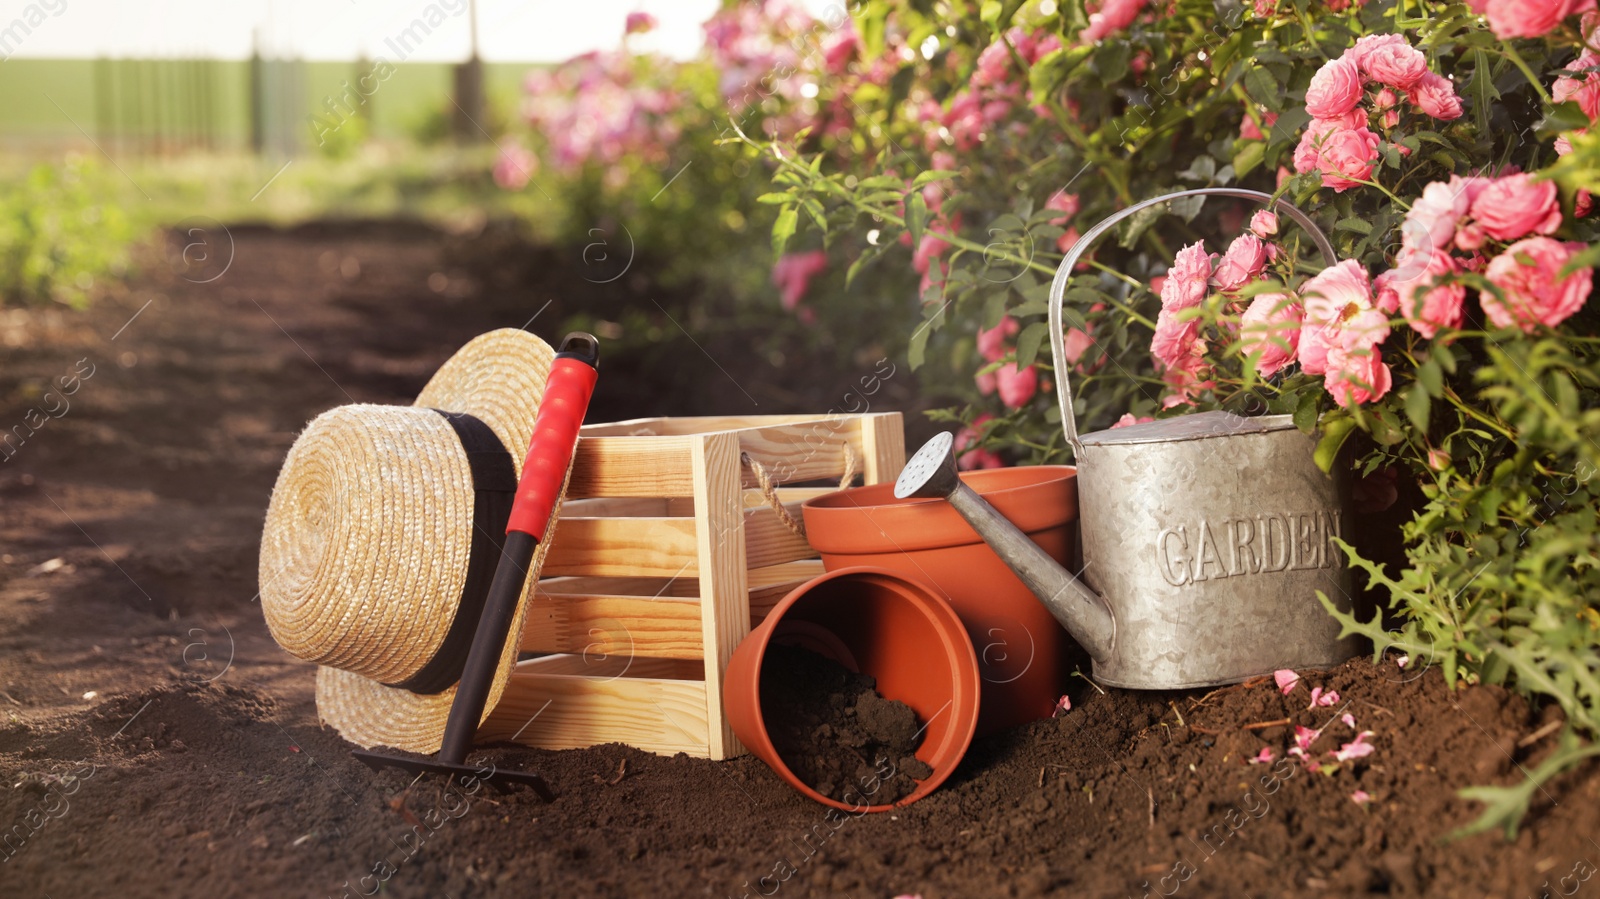 Photo of Straw hat, gardening tools and equipment near rose bushes outdoors